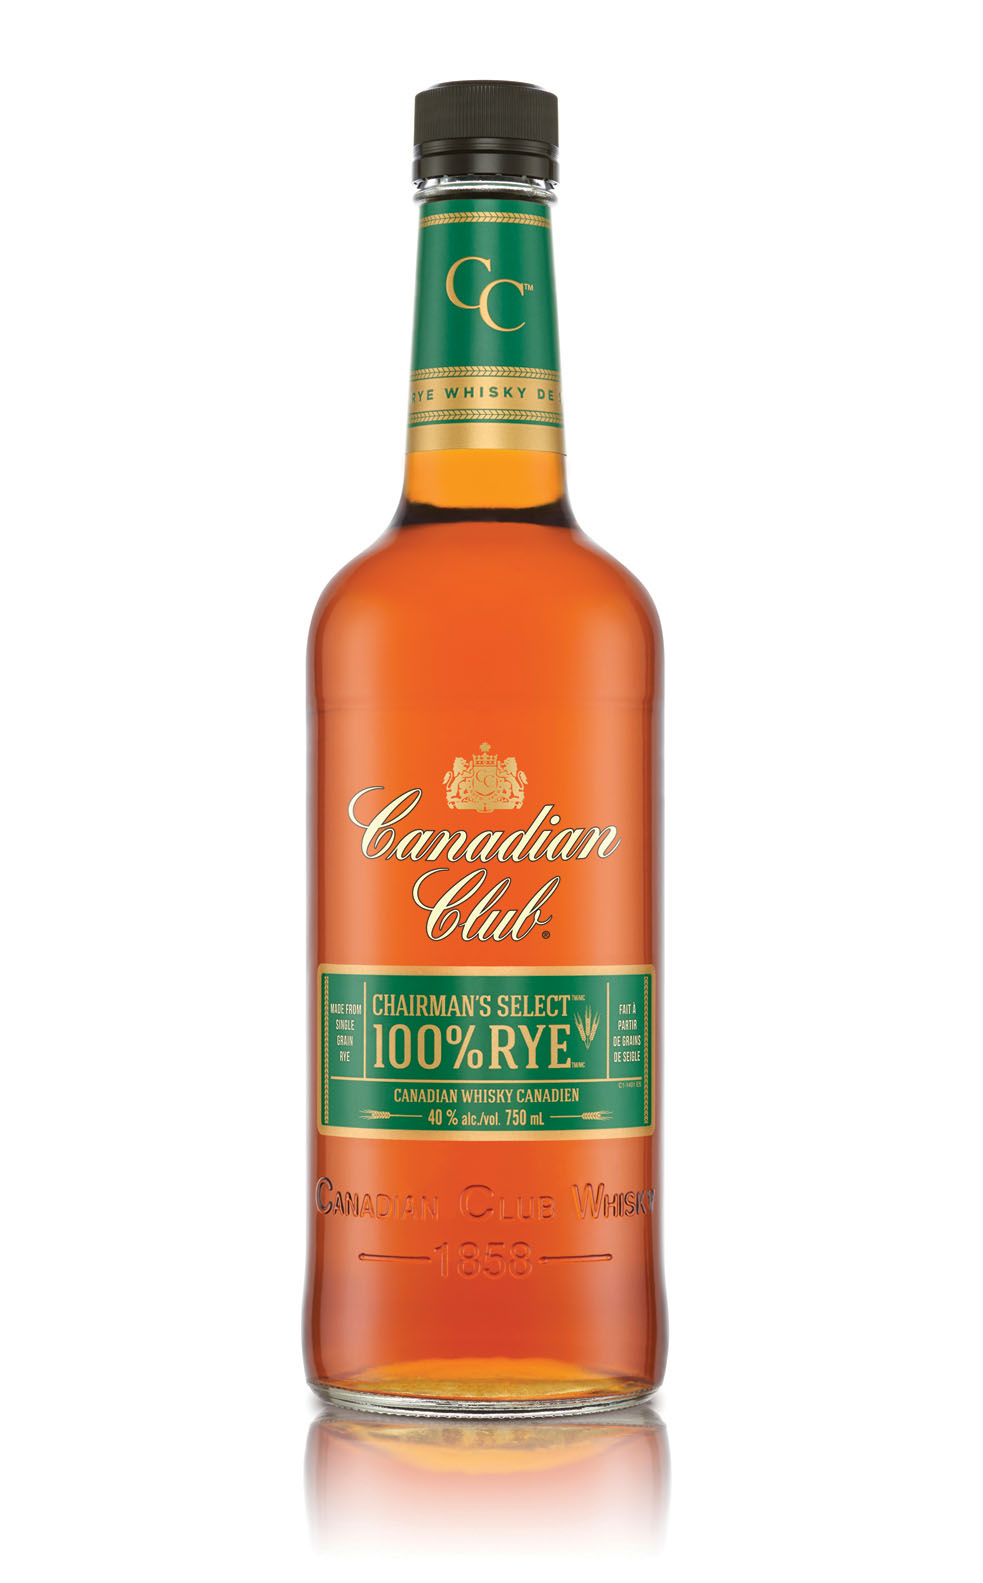 Canadian Club launches Canadian Club Chairman's Select 100% Rye. (CNW Group/Beam Suntory Inc.)